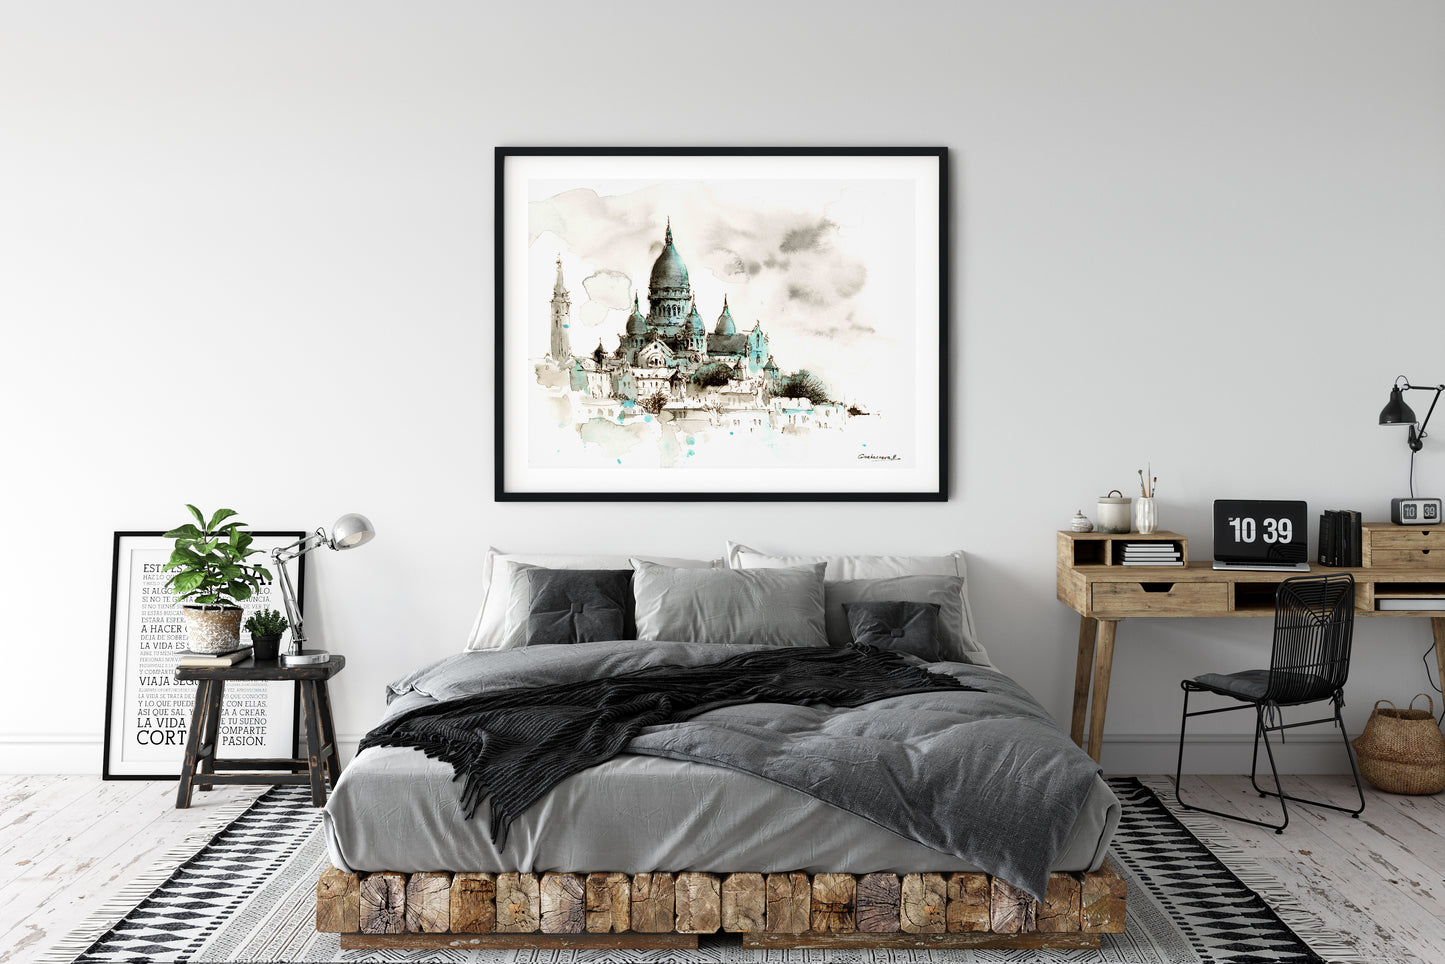 Paris Wall Art, Europe Art Print, French Architecture, Basilica Sacre Coeur, Watercolor Sketch Painting, Travel Gift For Women